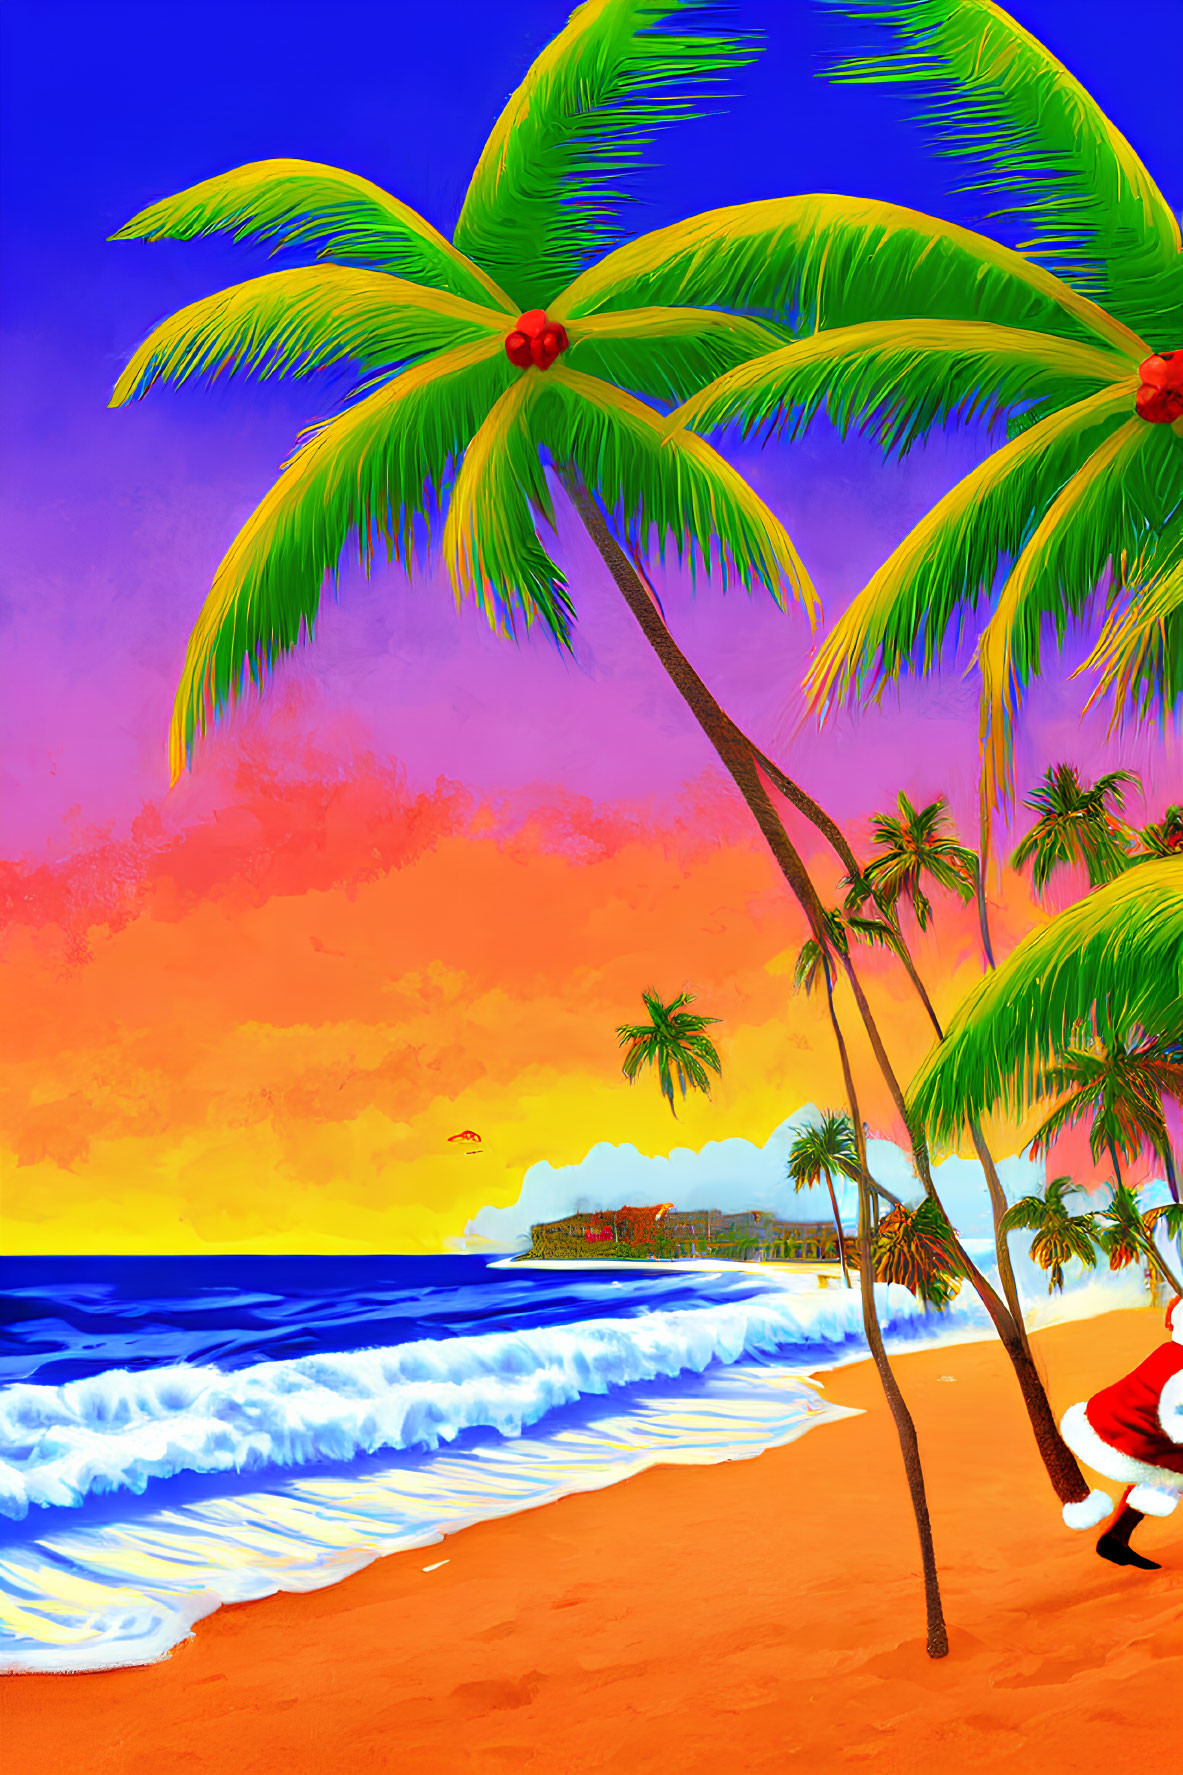 Santa Claus on Tropical Beach with Palm Trees and Sunset Sky